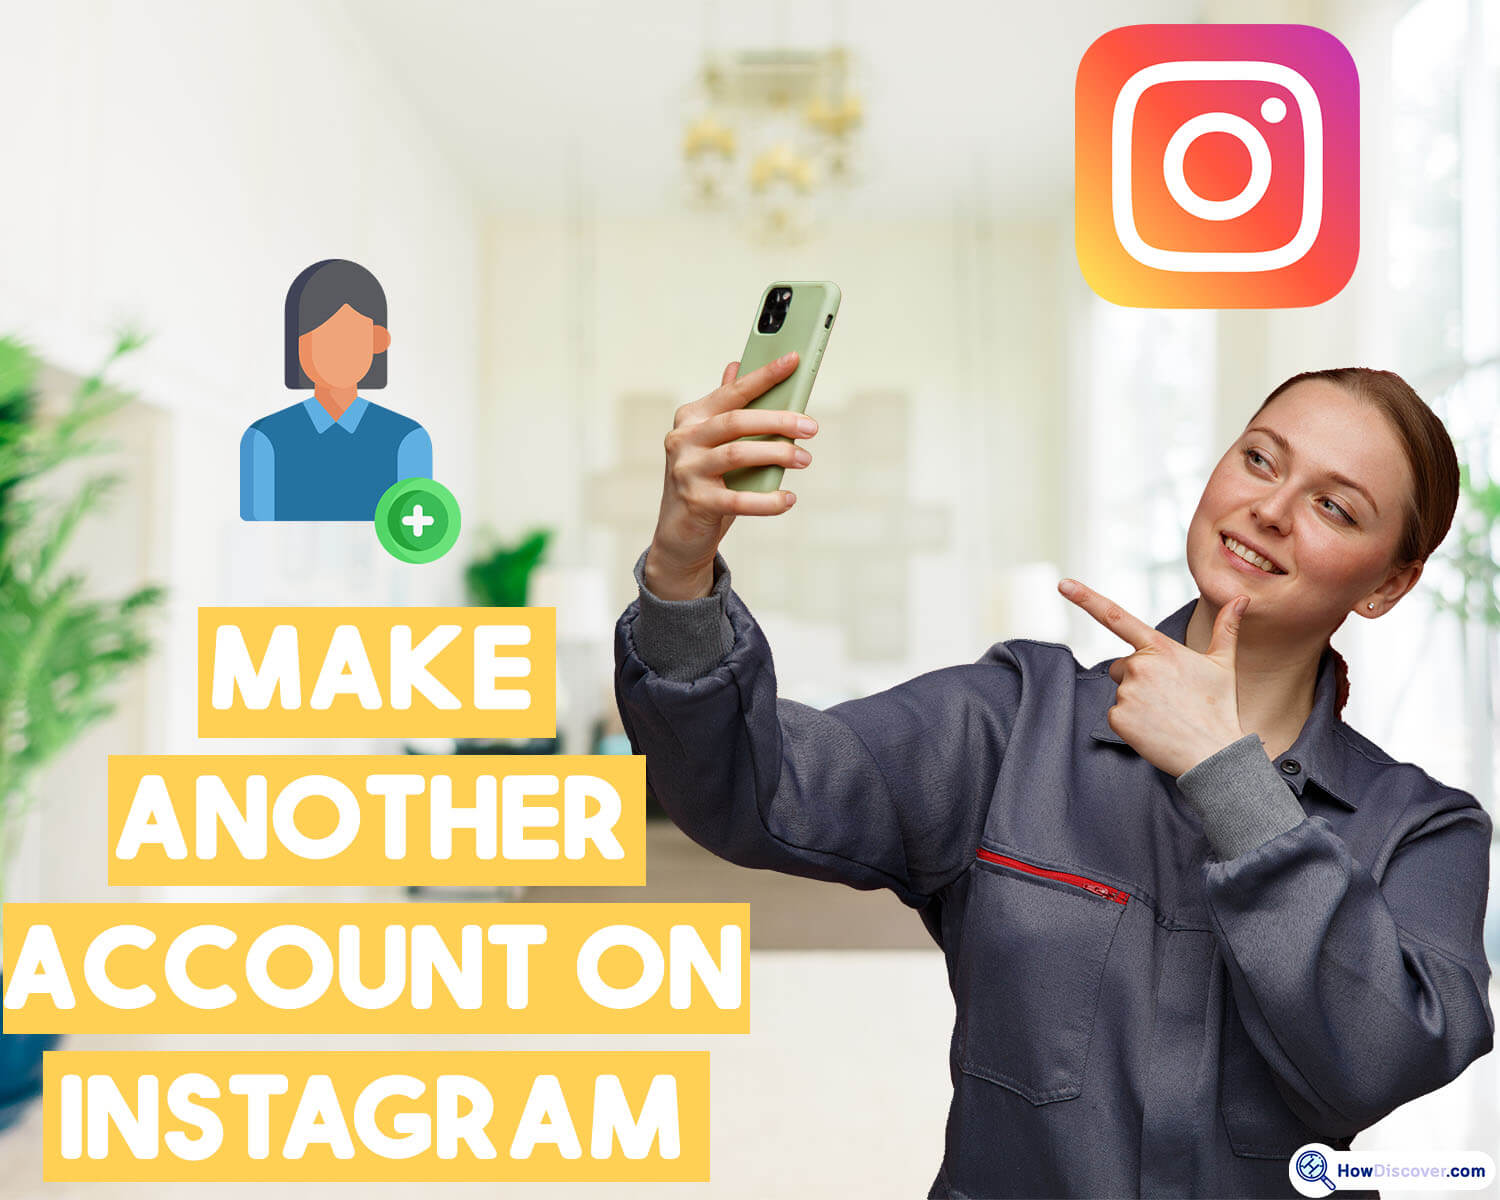 How To Make Another Account On Instagram?